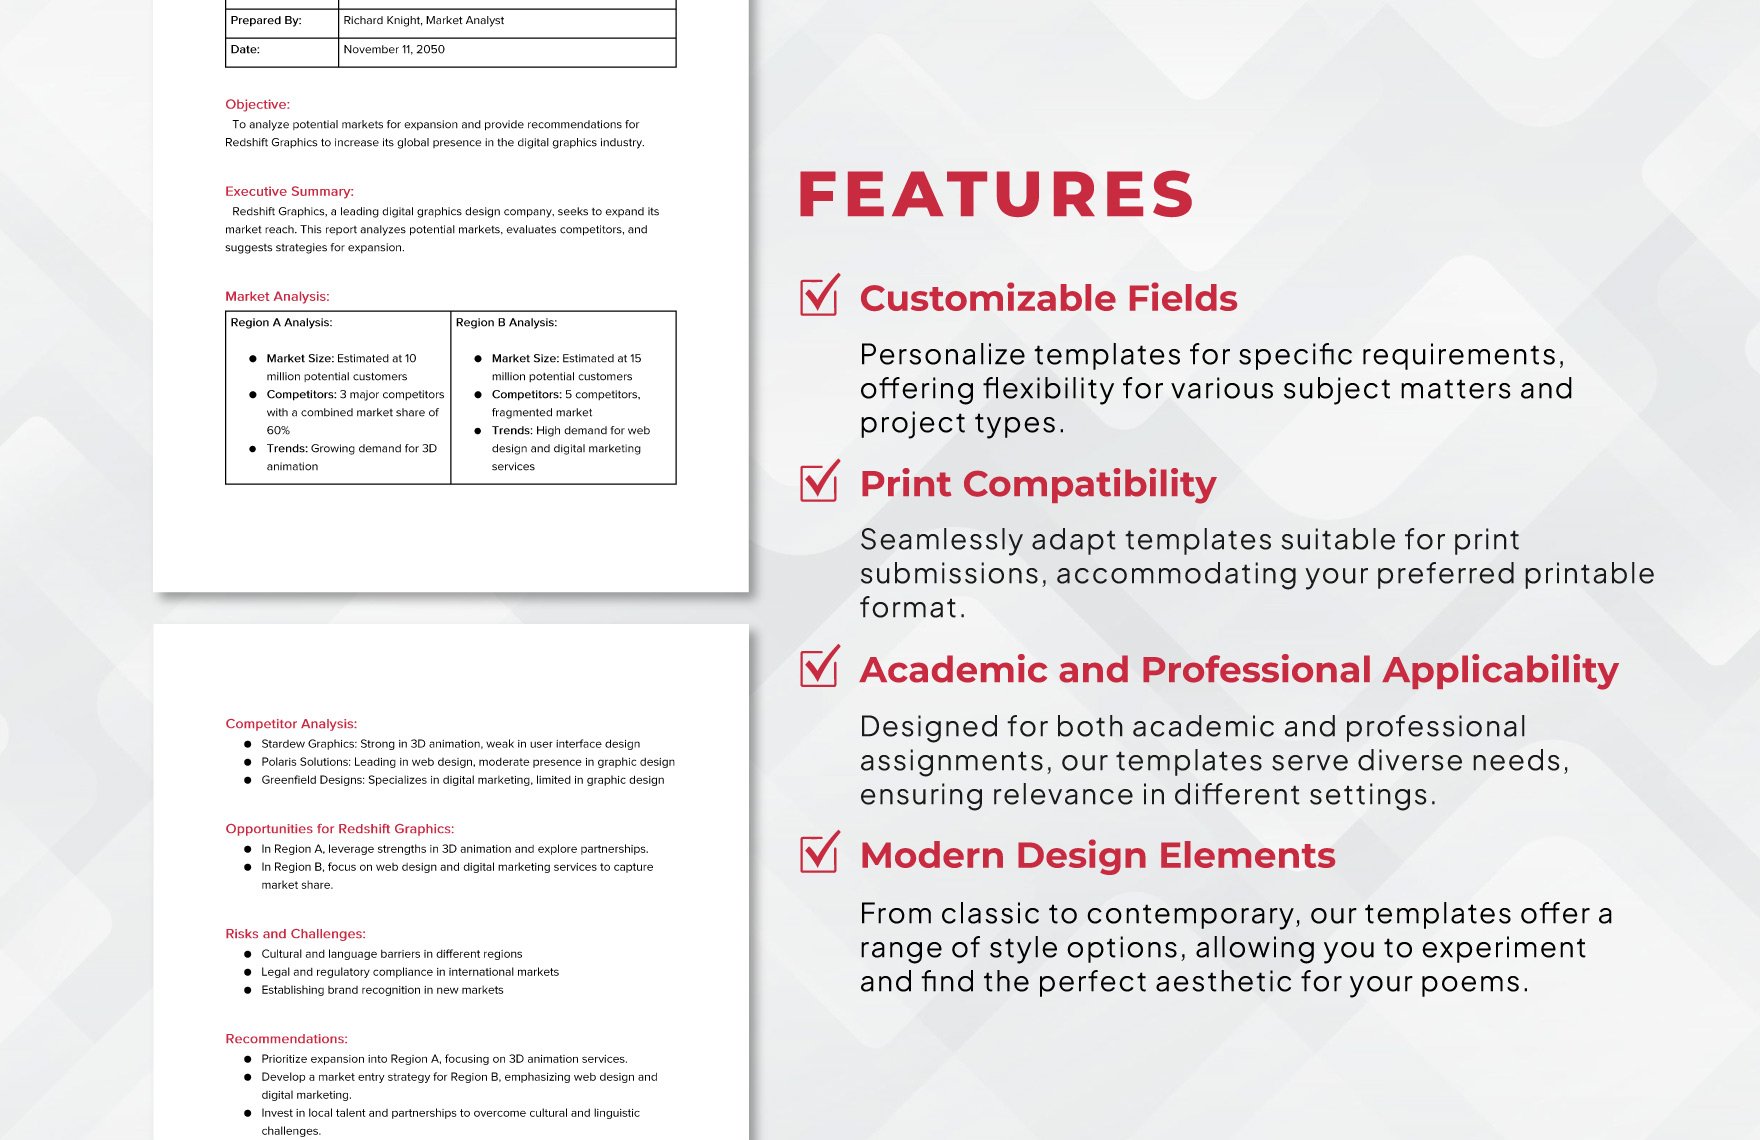 Professional Assignment Template